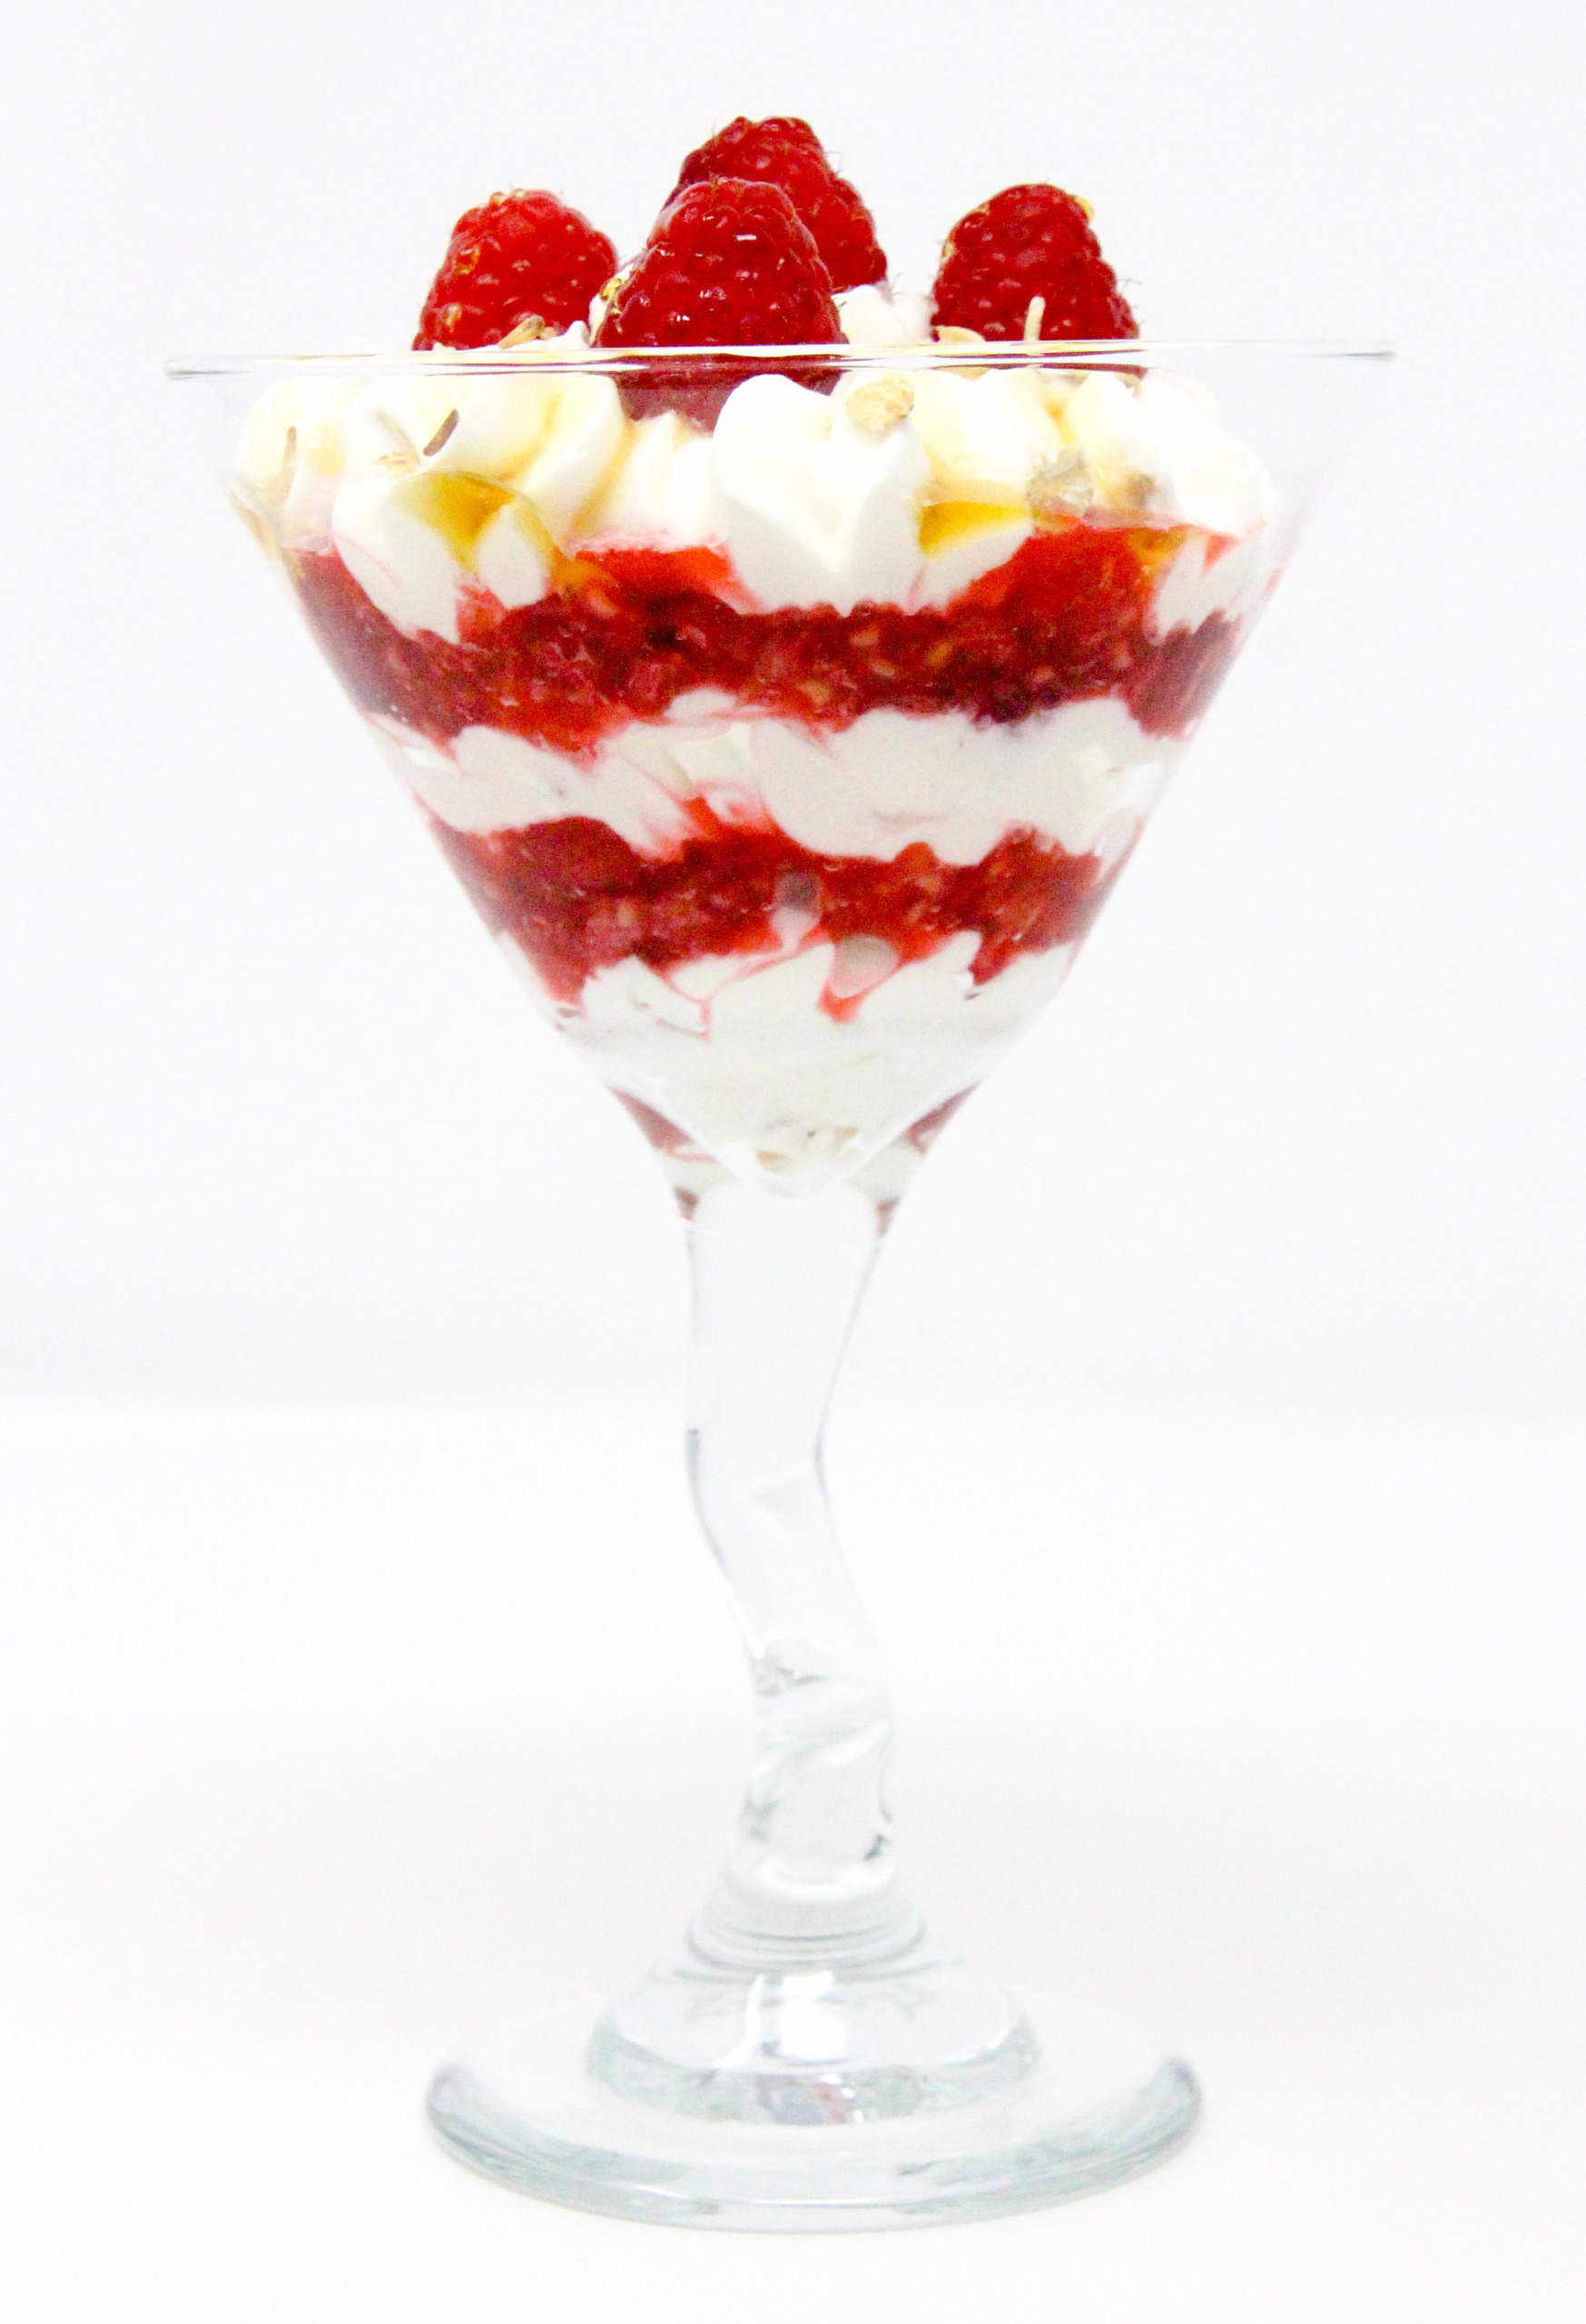 This Americanized version of Cranachan features layers of sweet red raspberries, whiskey imbued whipped cream and toasted oats making it a popular Burns Day dinner dessert! 